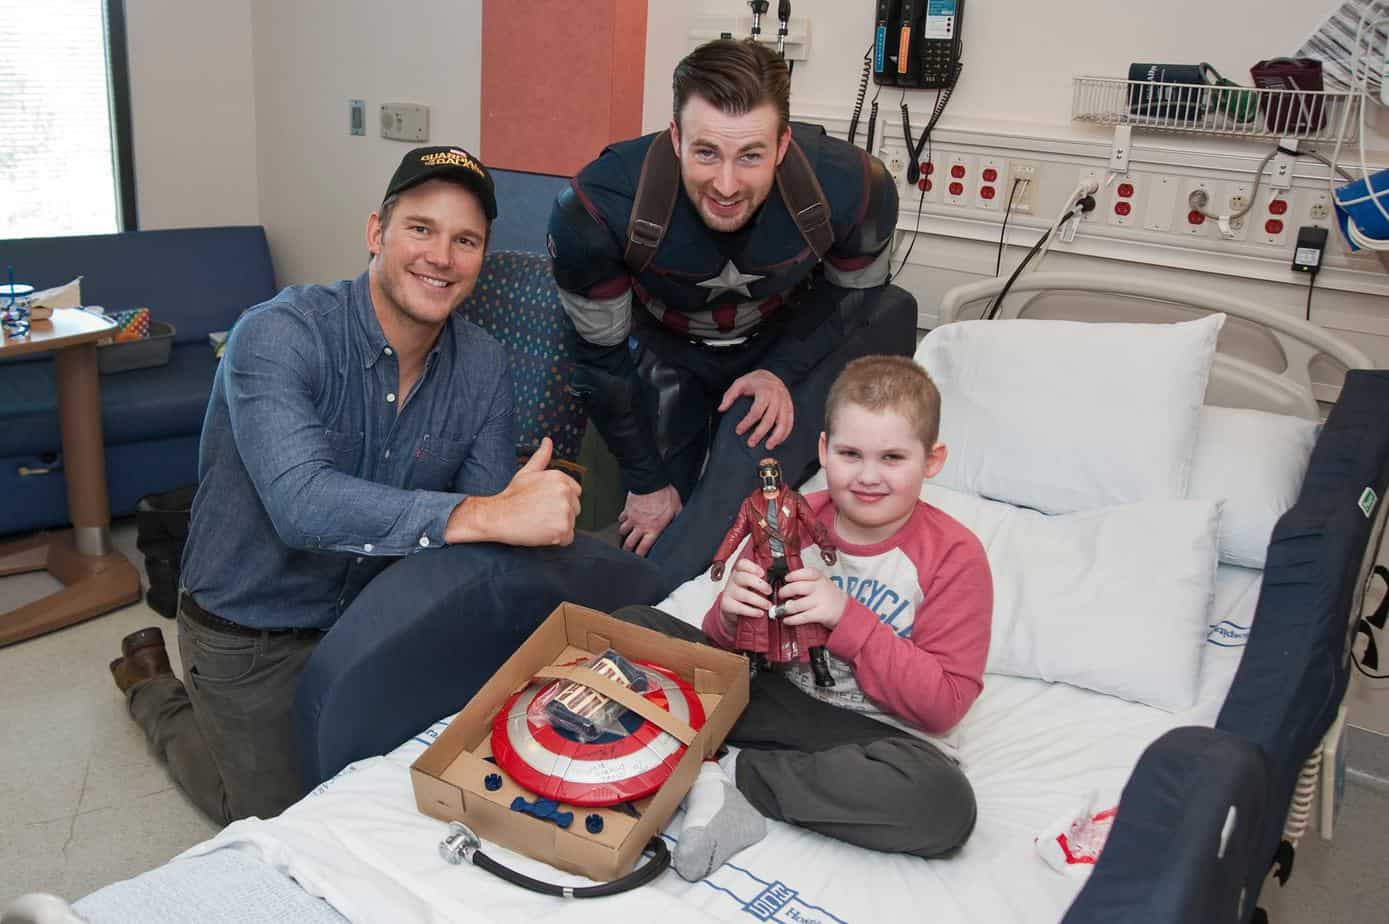 Chris Evand and Chris Patt at the Seattle Children's hospital surprising fans